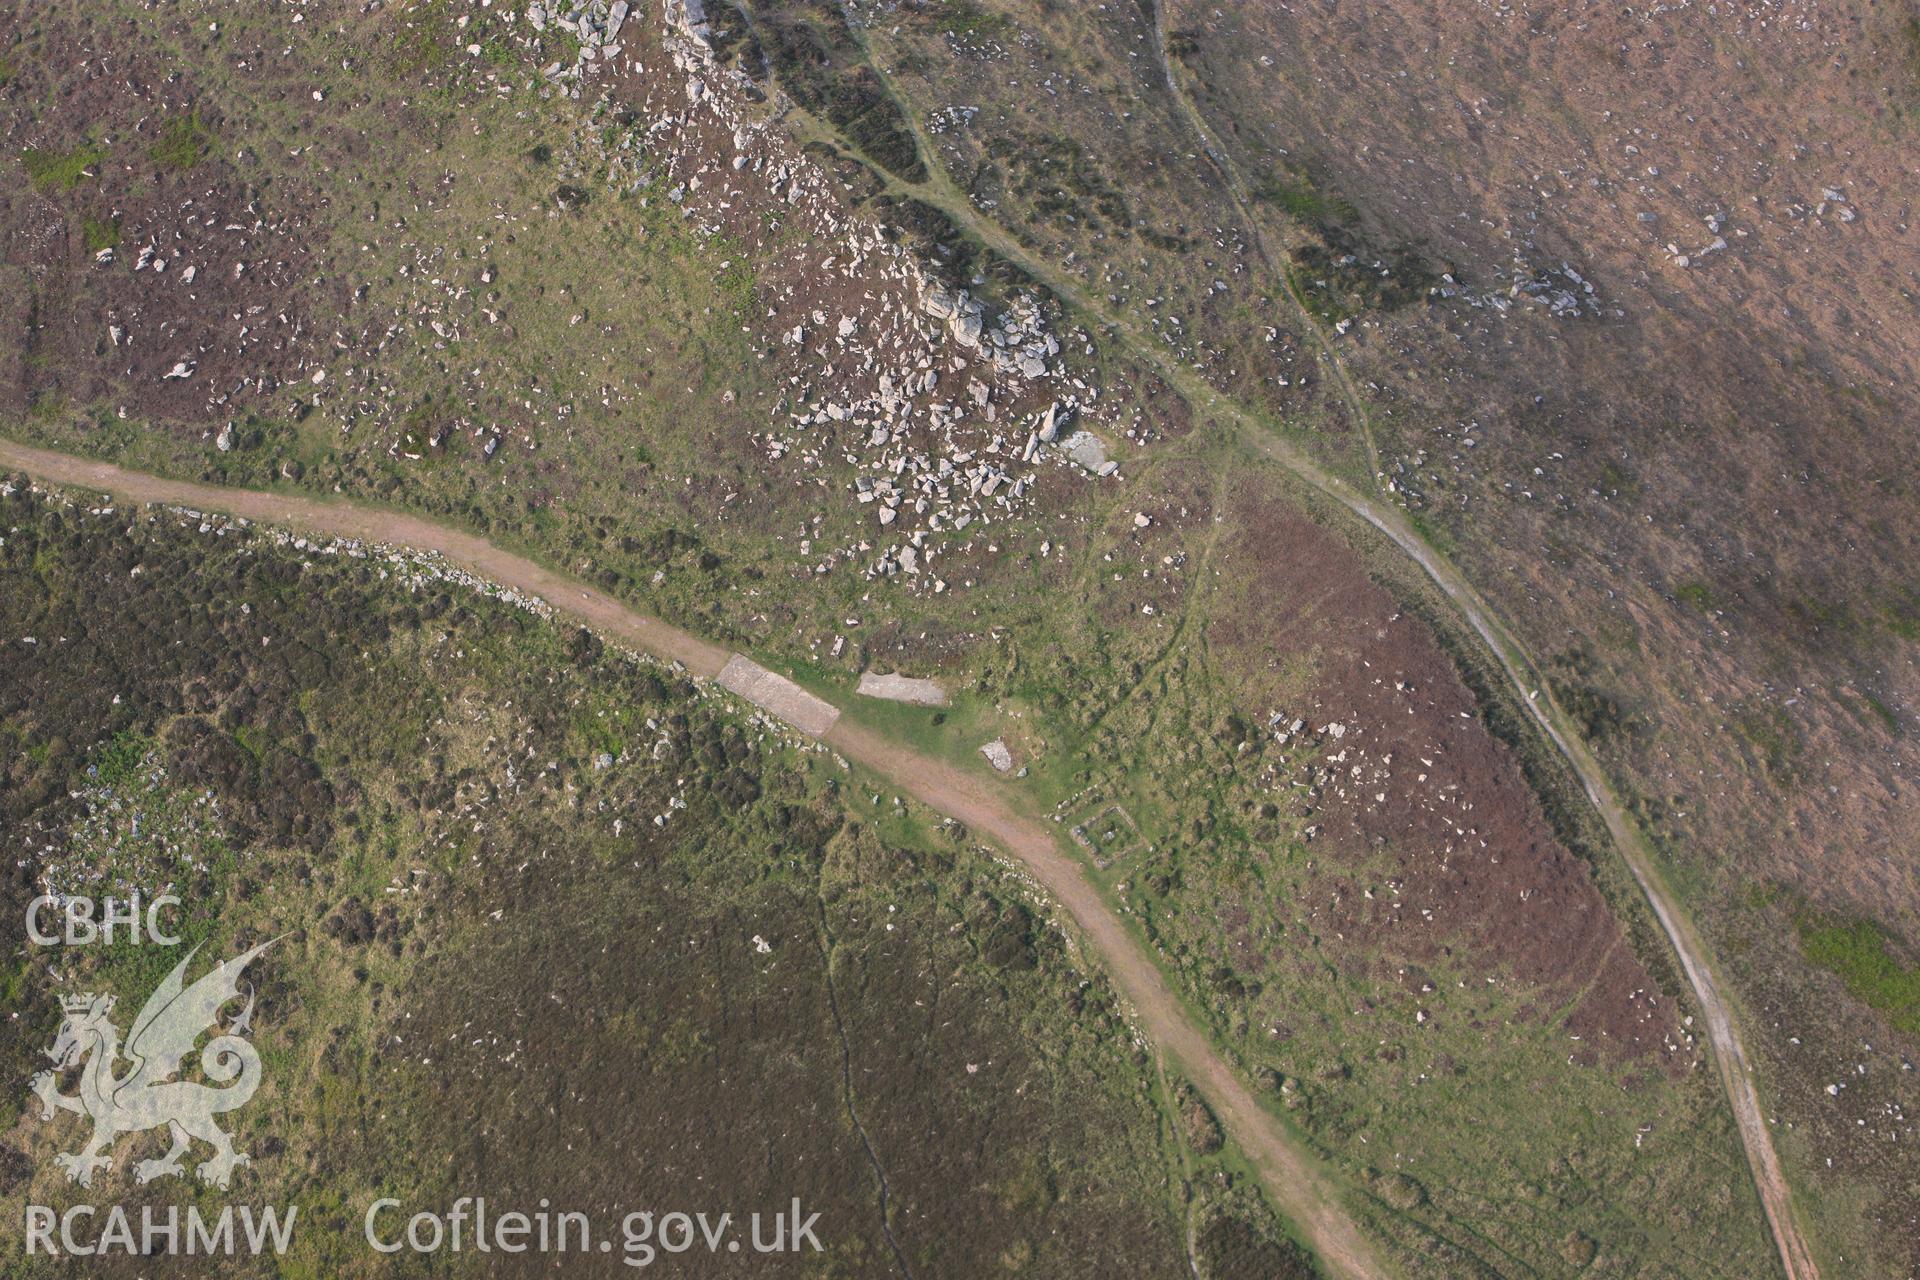 RCAHMW colour oblique photograph of Rhossili Down radar station. Taken by Toby Driver and Oliver Davies on 04/05/2011.